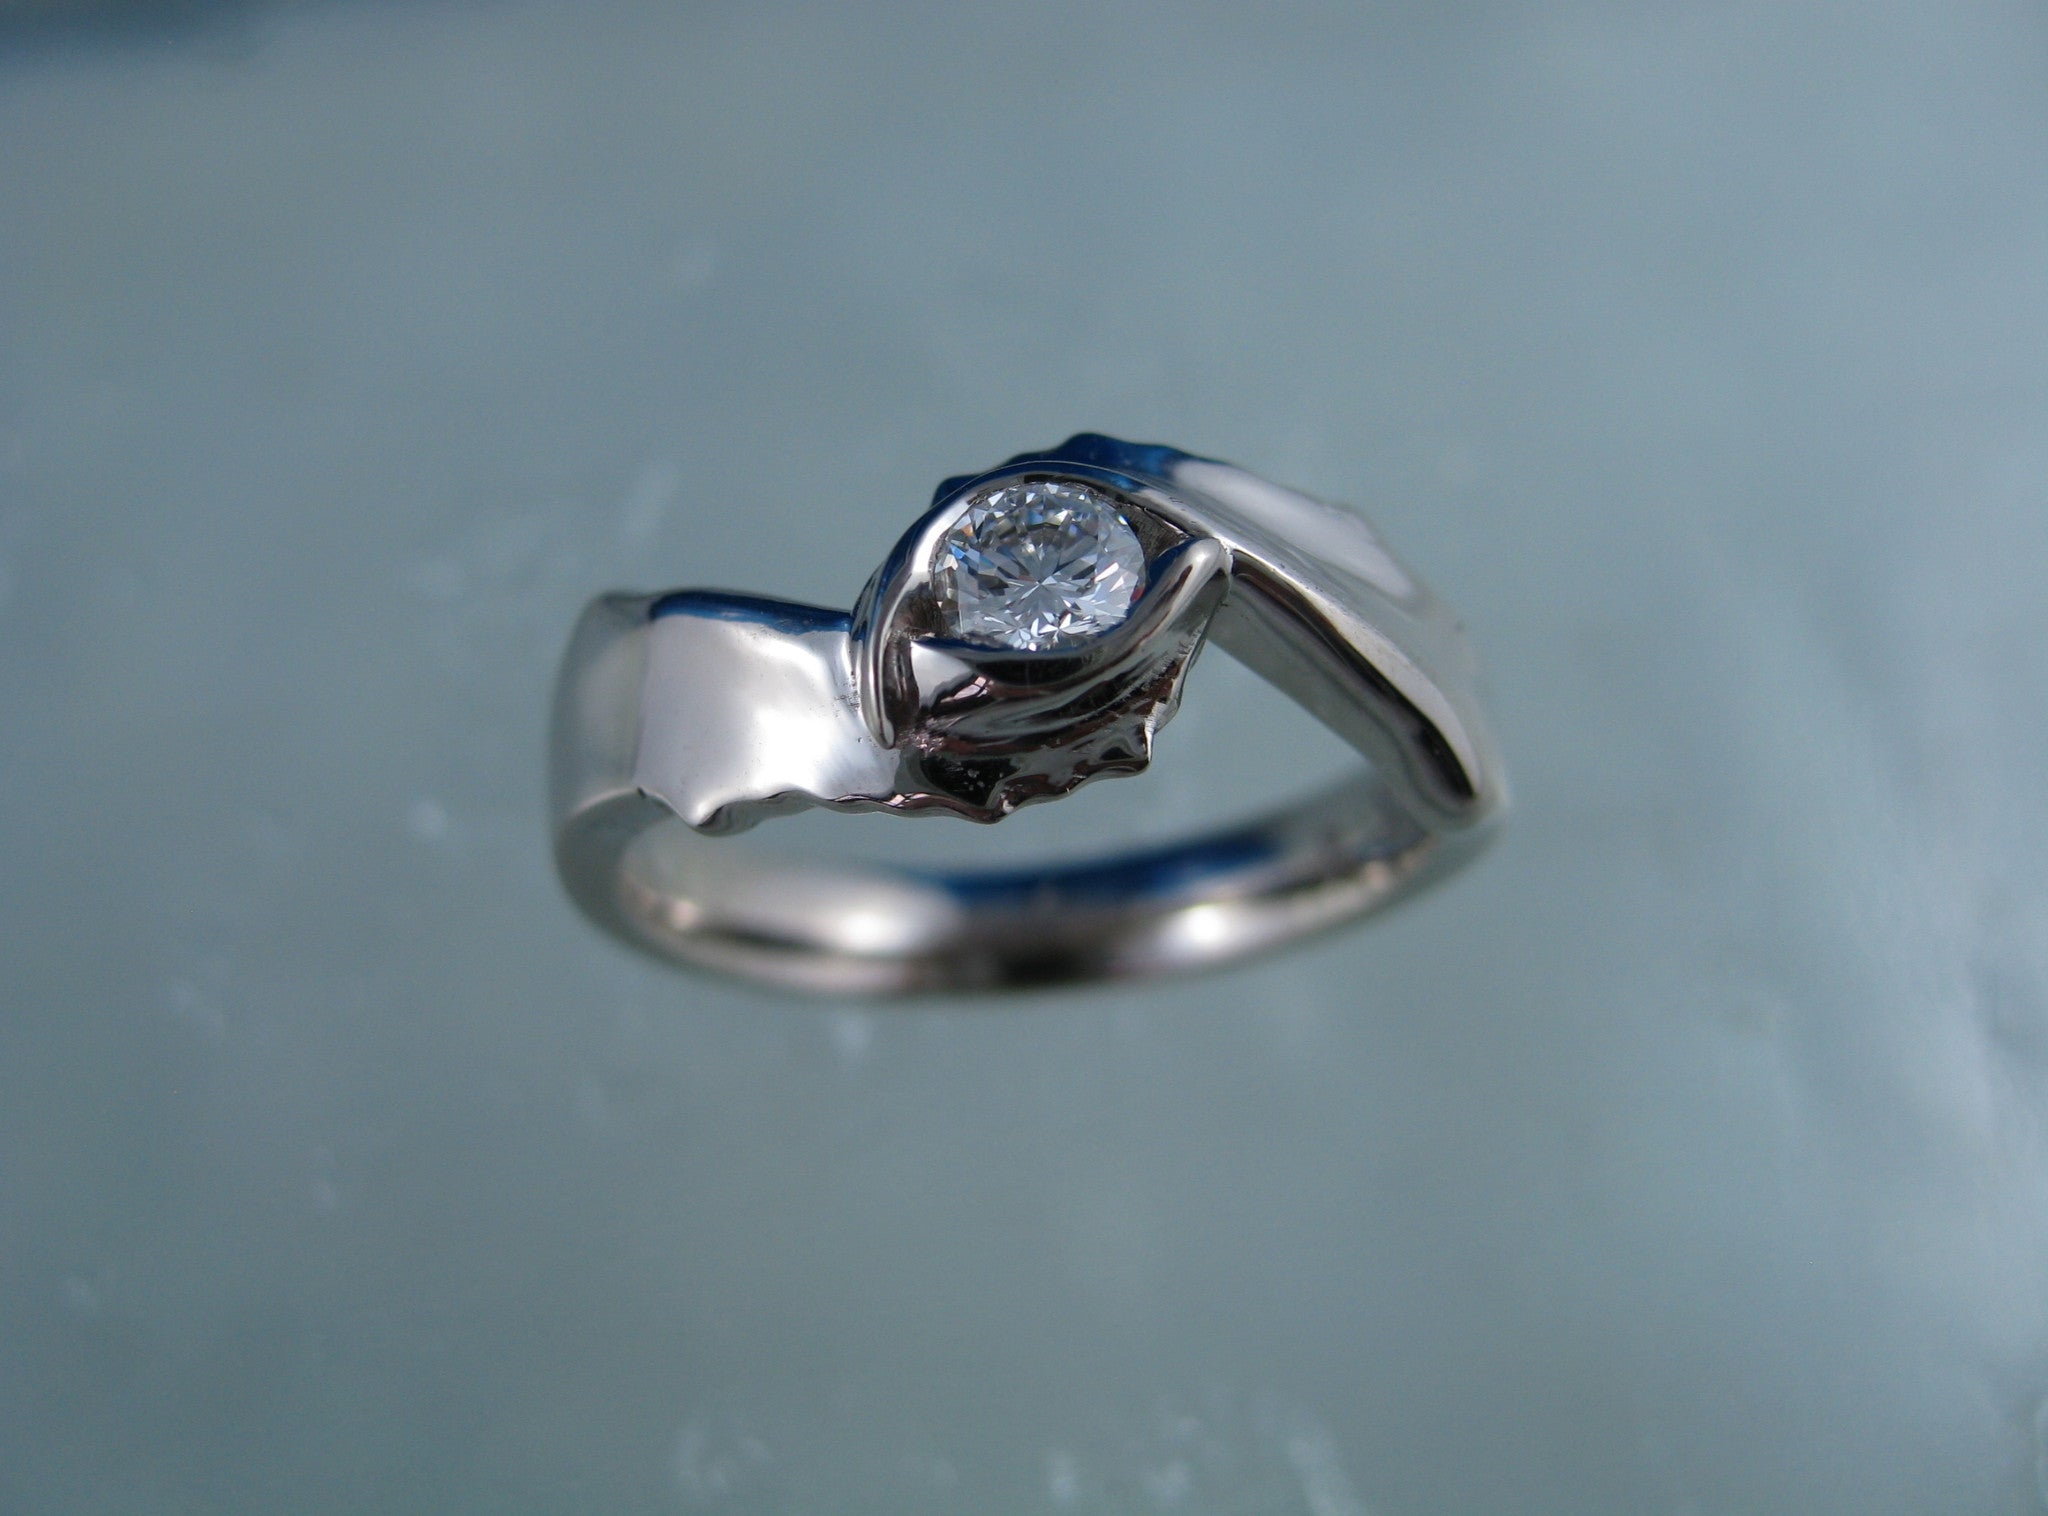 Stacey Humpback Whale Engagement Ring